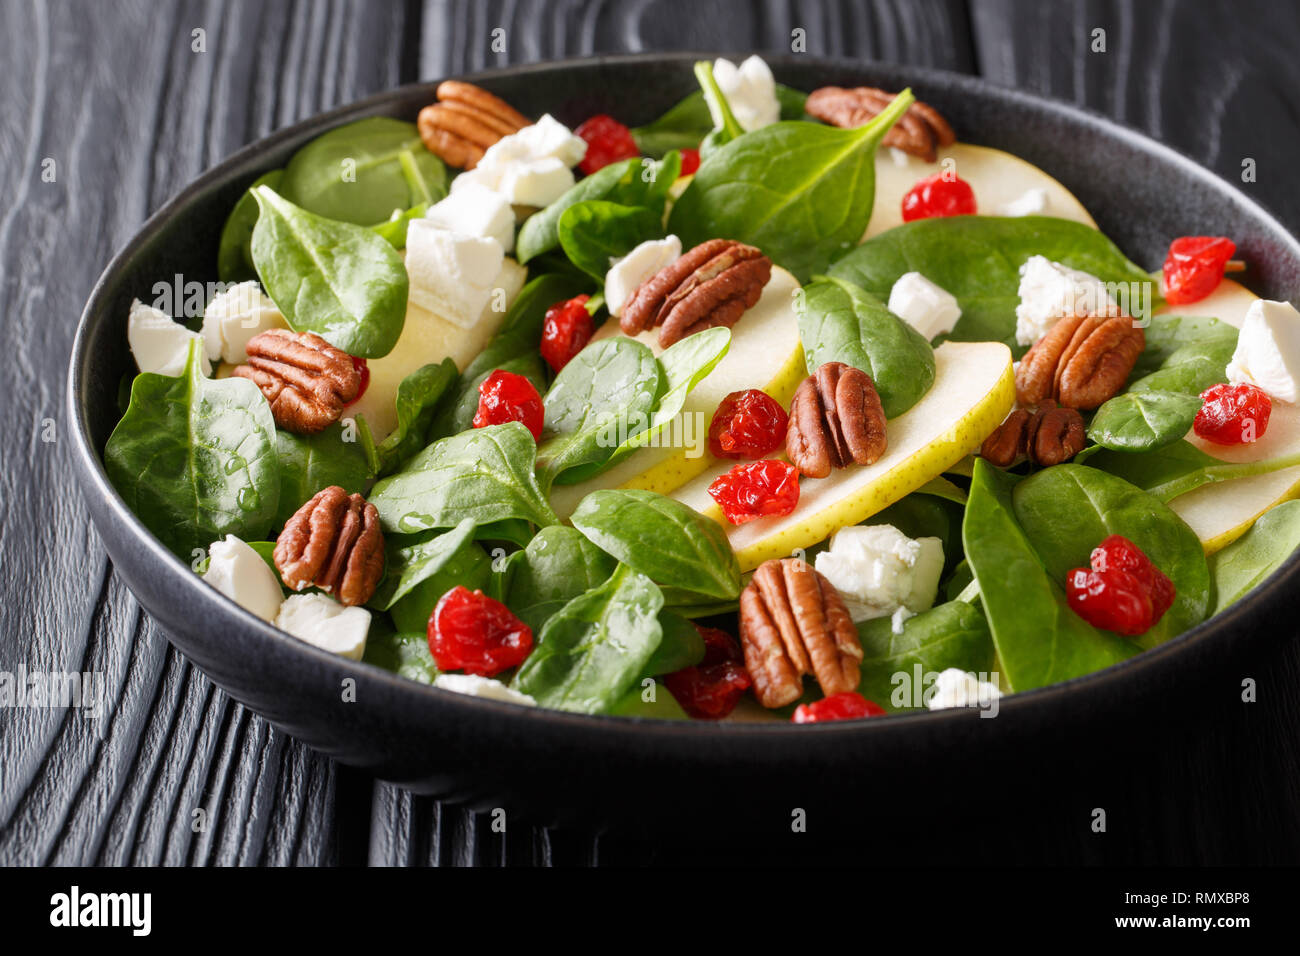 Spicy fruit salad with pears, baby spinach, pecans, feta cheese and cherries closeup on a plate on the table. horizontal Stock Photo